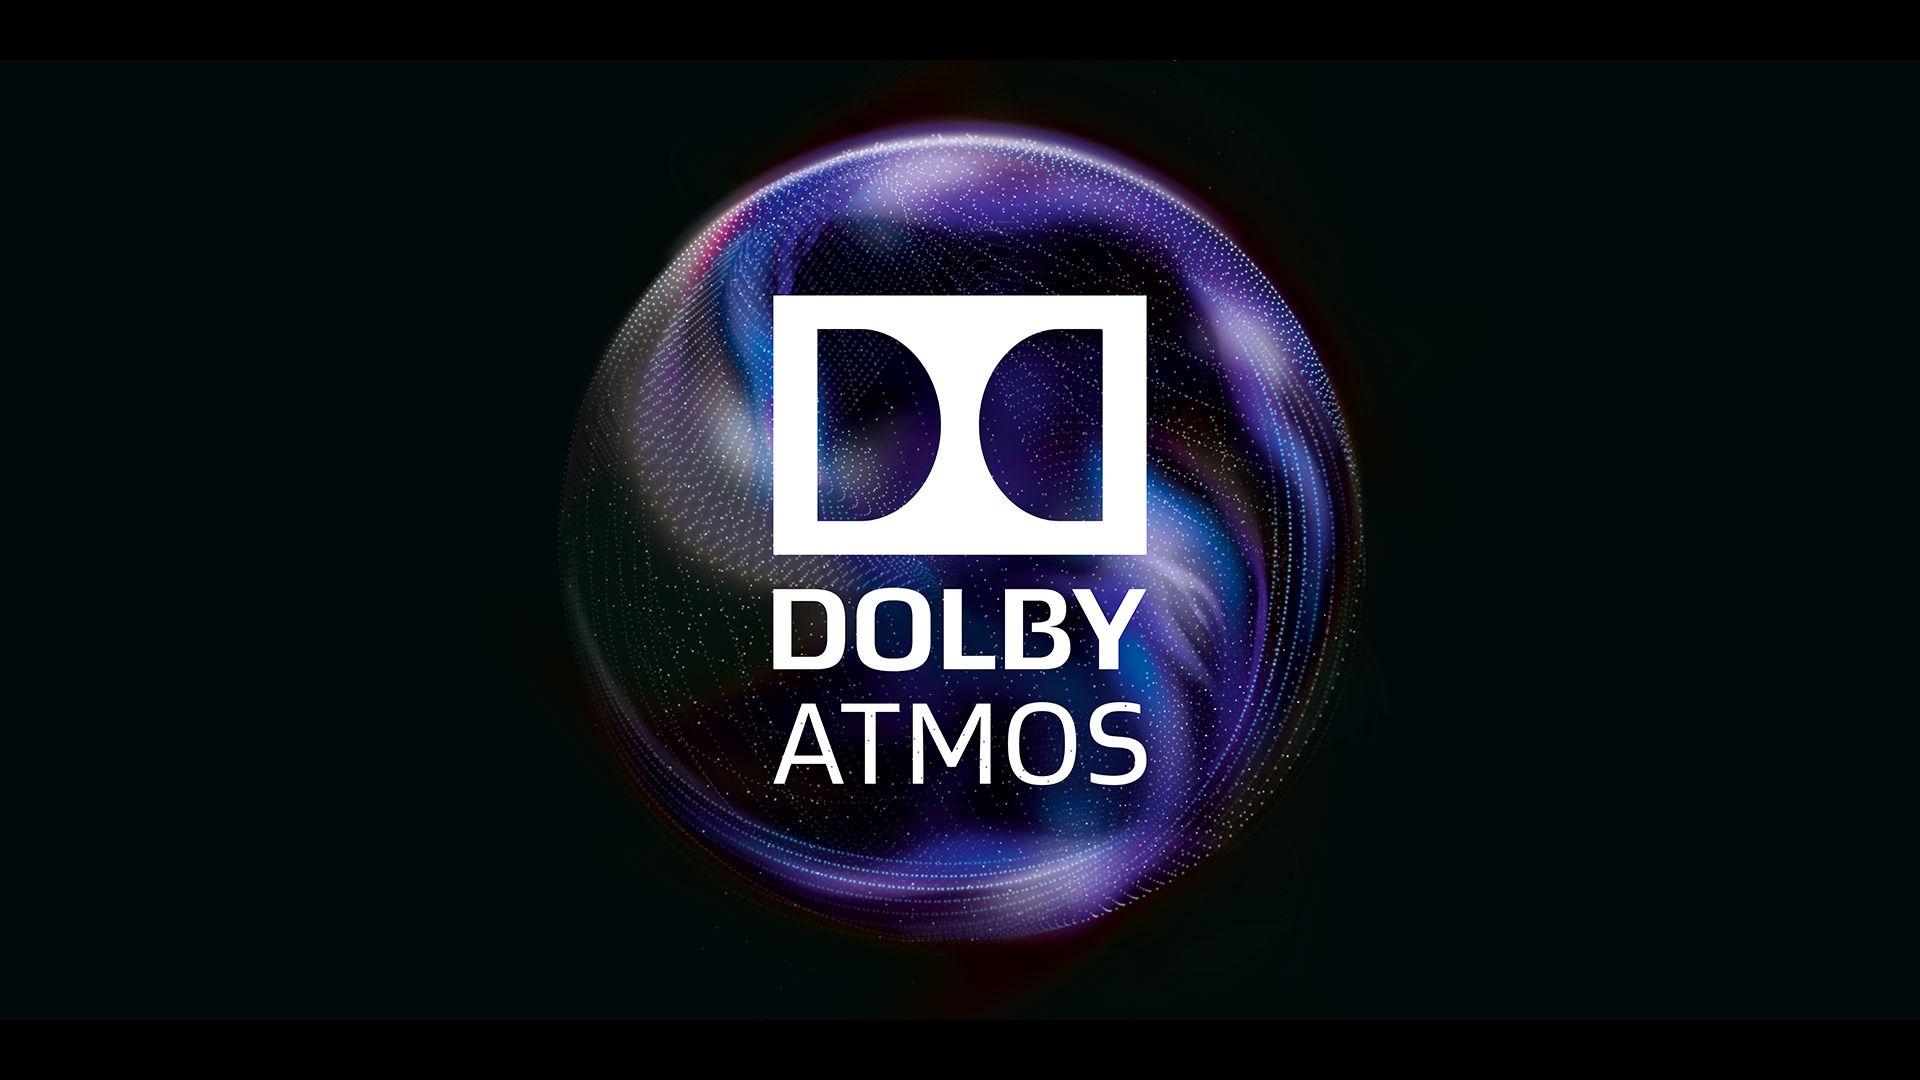 Dolby Atmos Logo - Dolby Atmos illustrations. Dolby Logo. Graphic